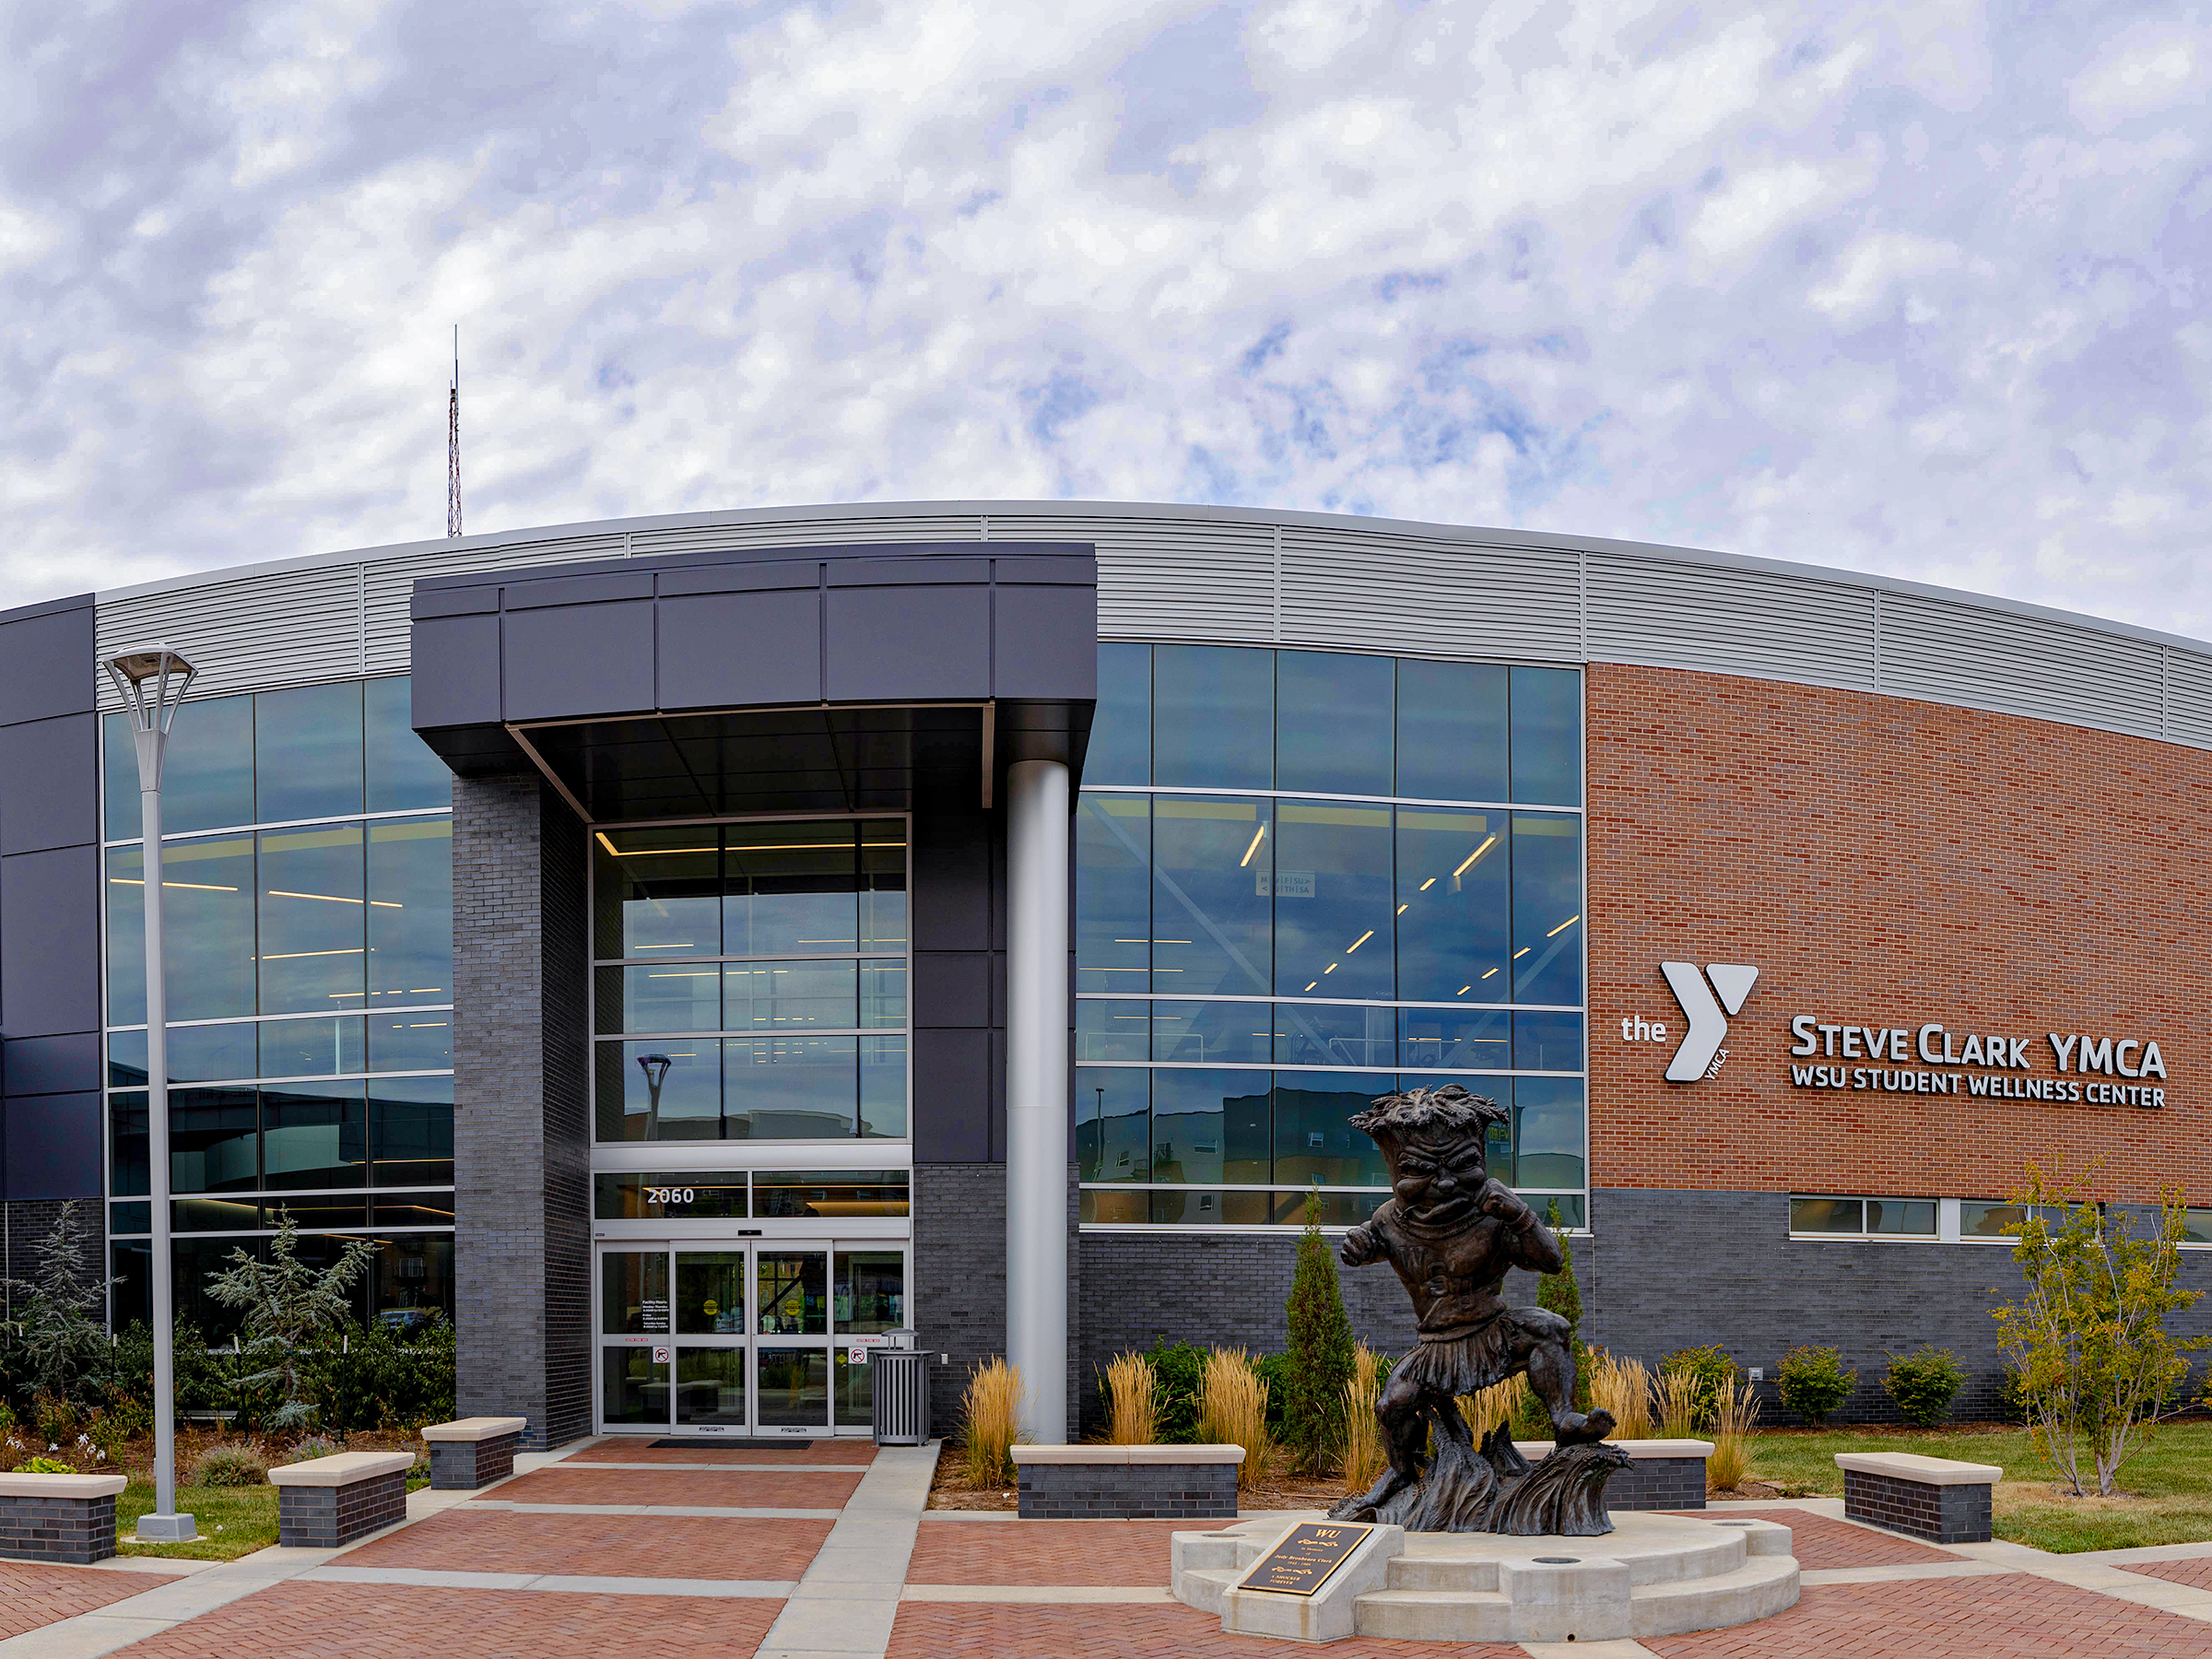 Entrance to Wichita State's Steve Clark YMCA and Student Wellness Center.